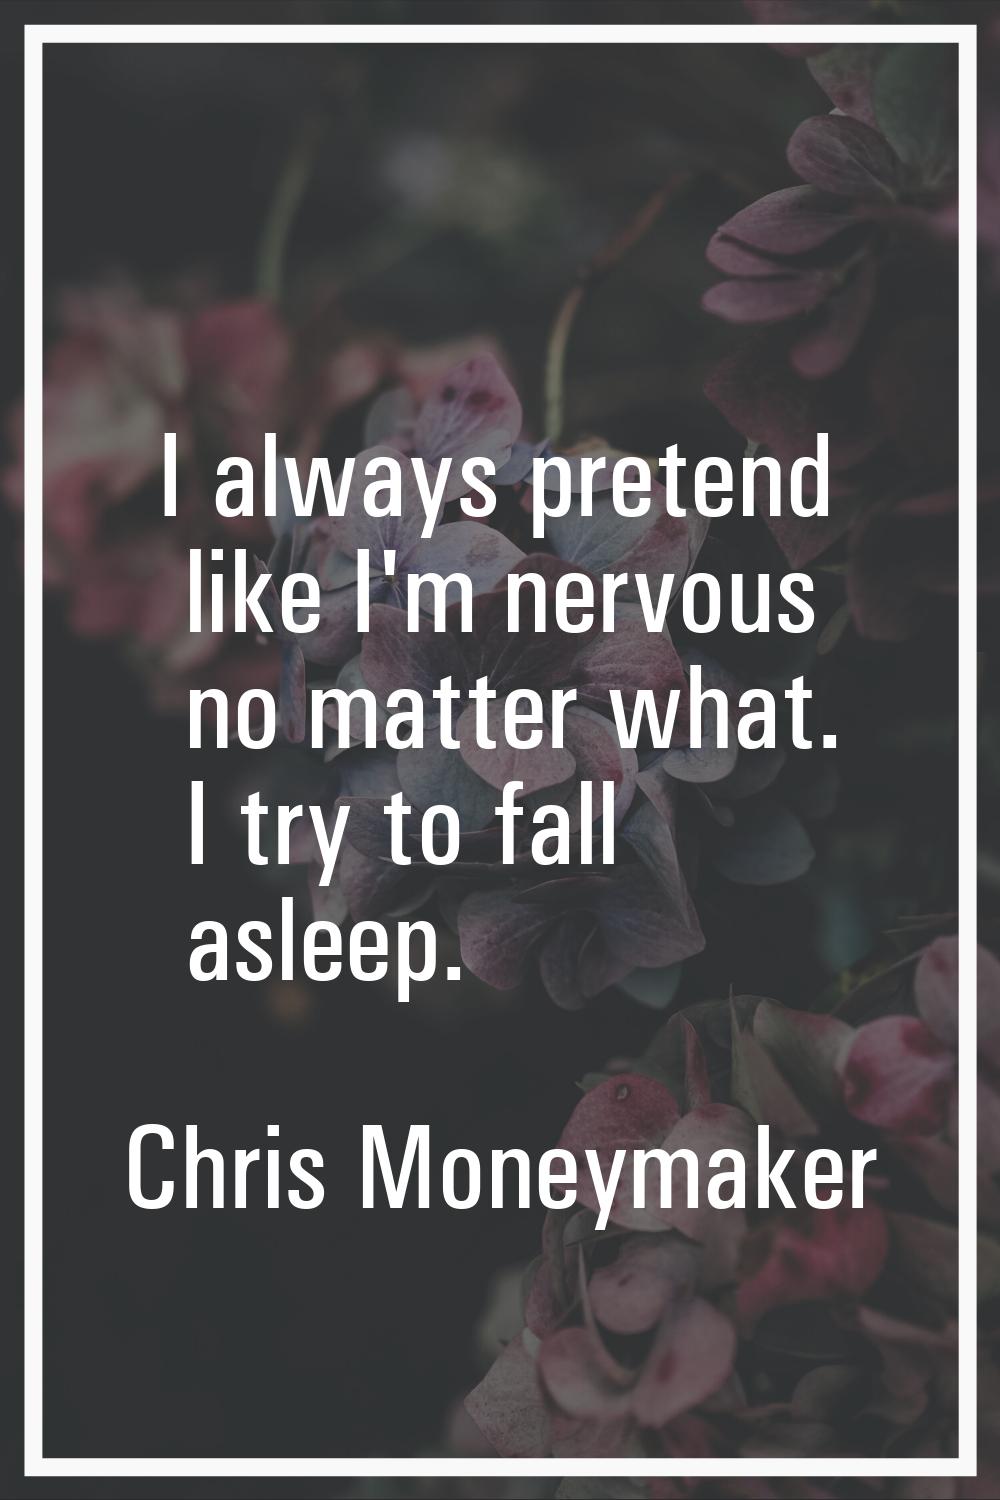 I always pretend like I'm nervous no matter what. I try to fall asleep.